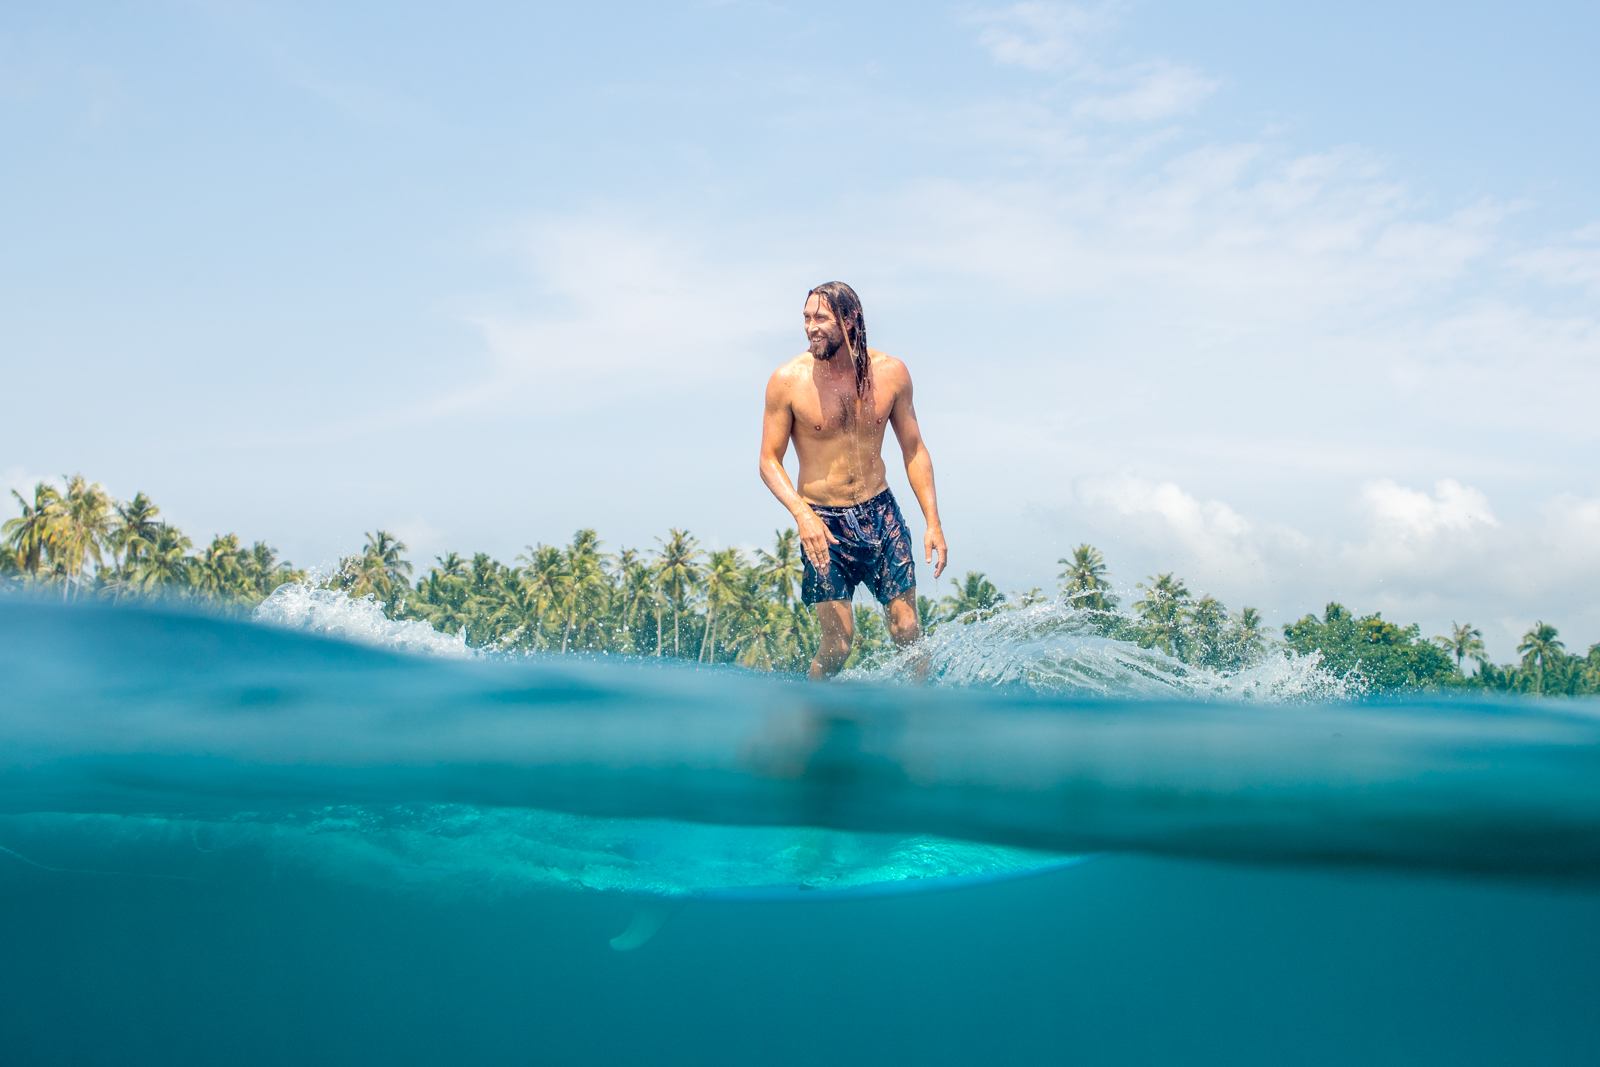 More Boardshorts: A Chat With Asher Pacey